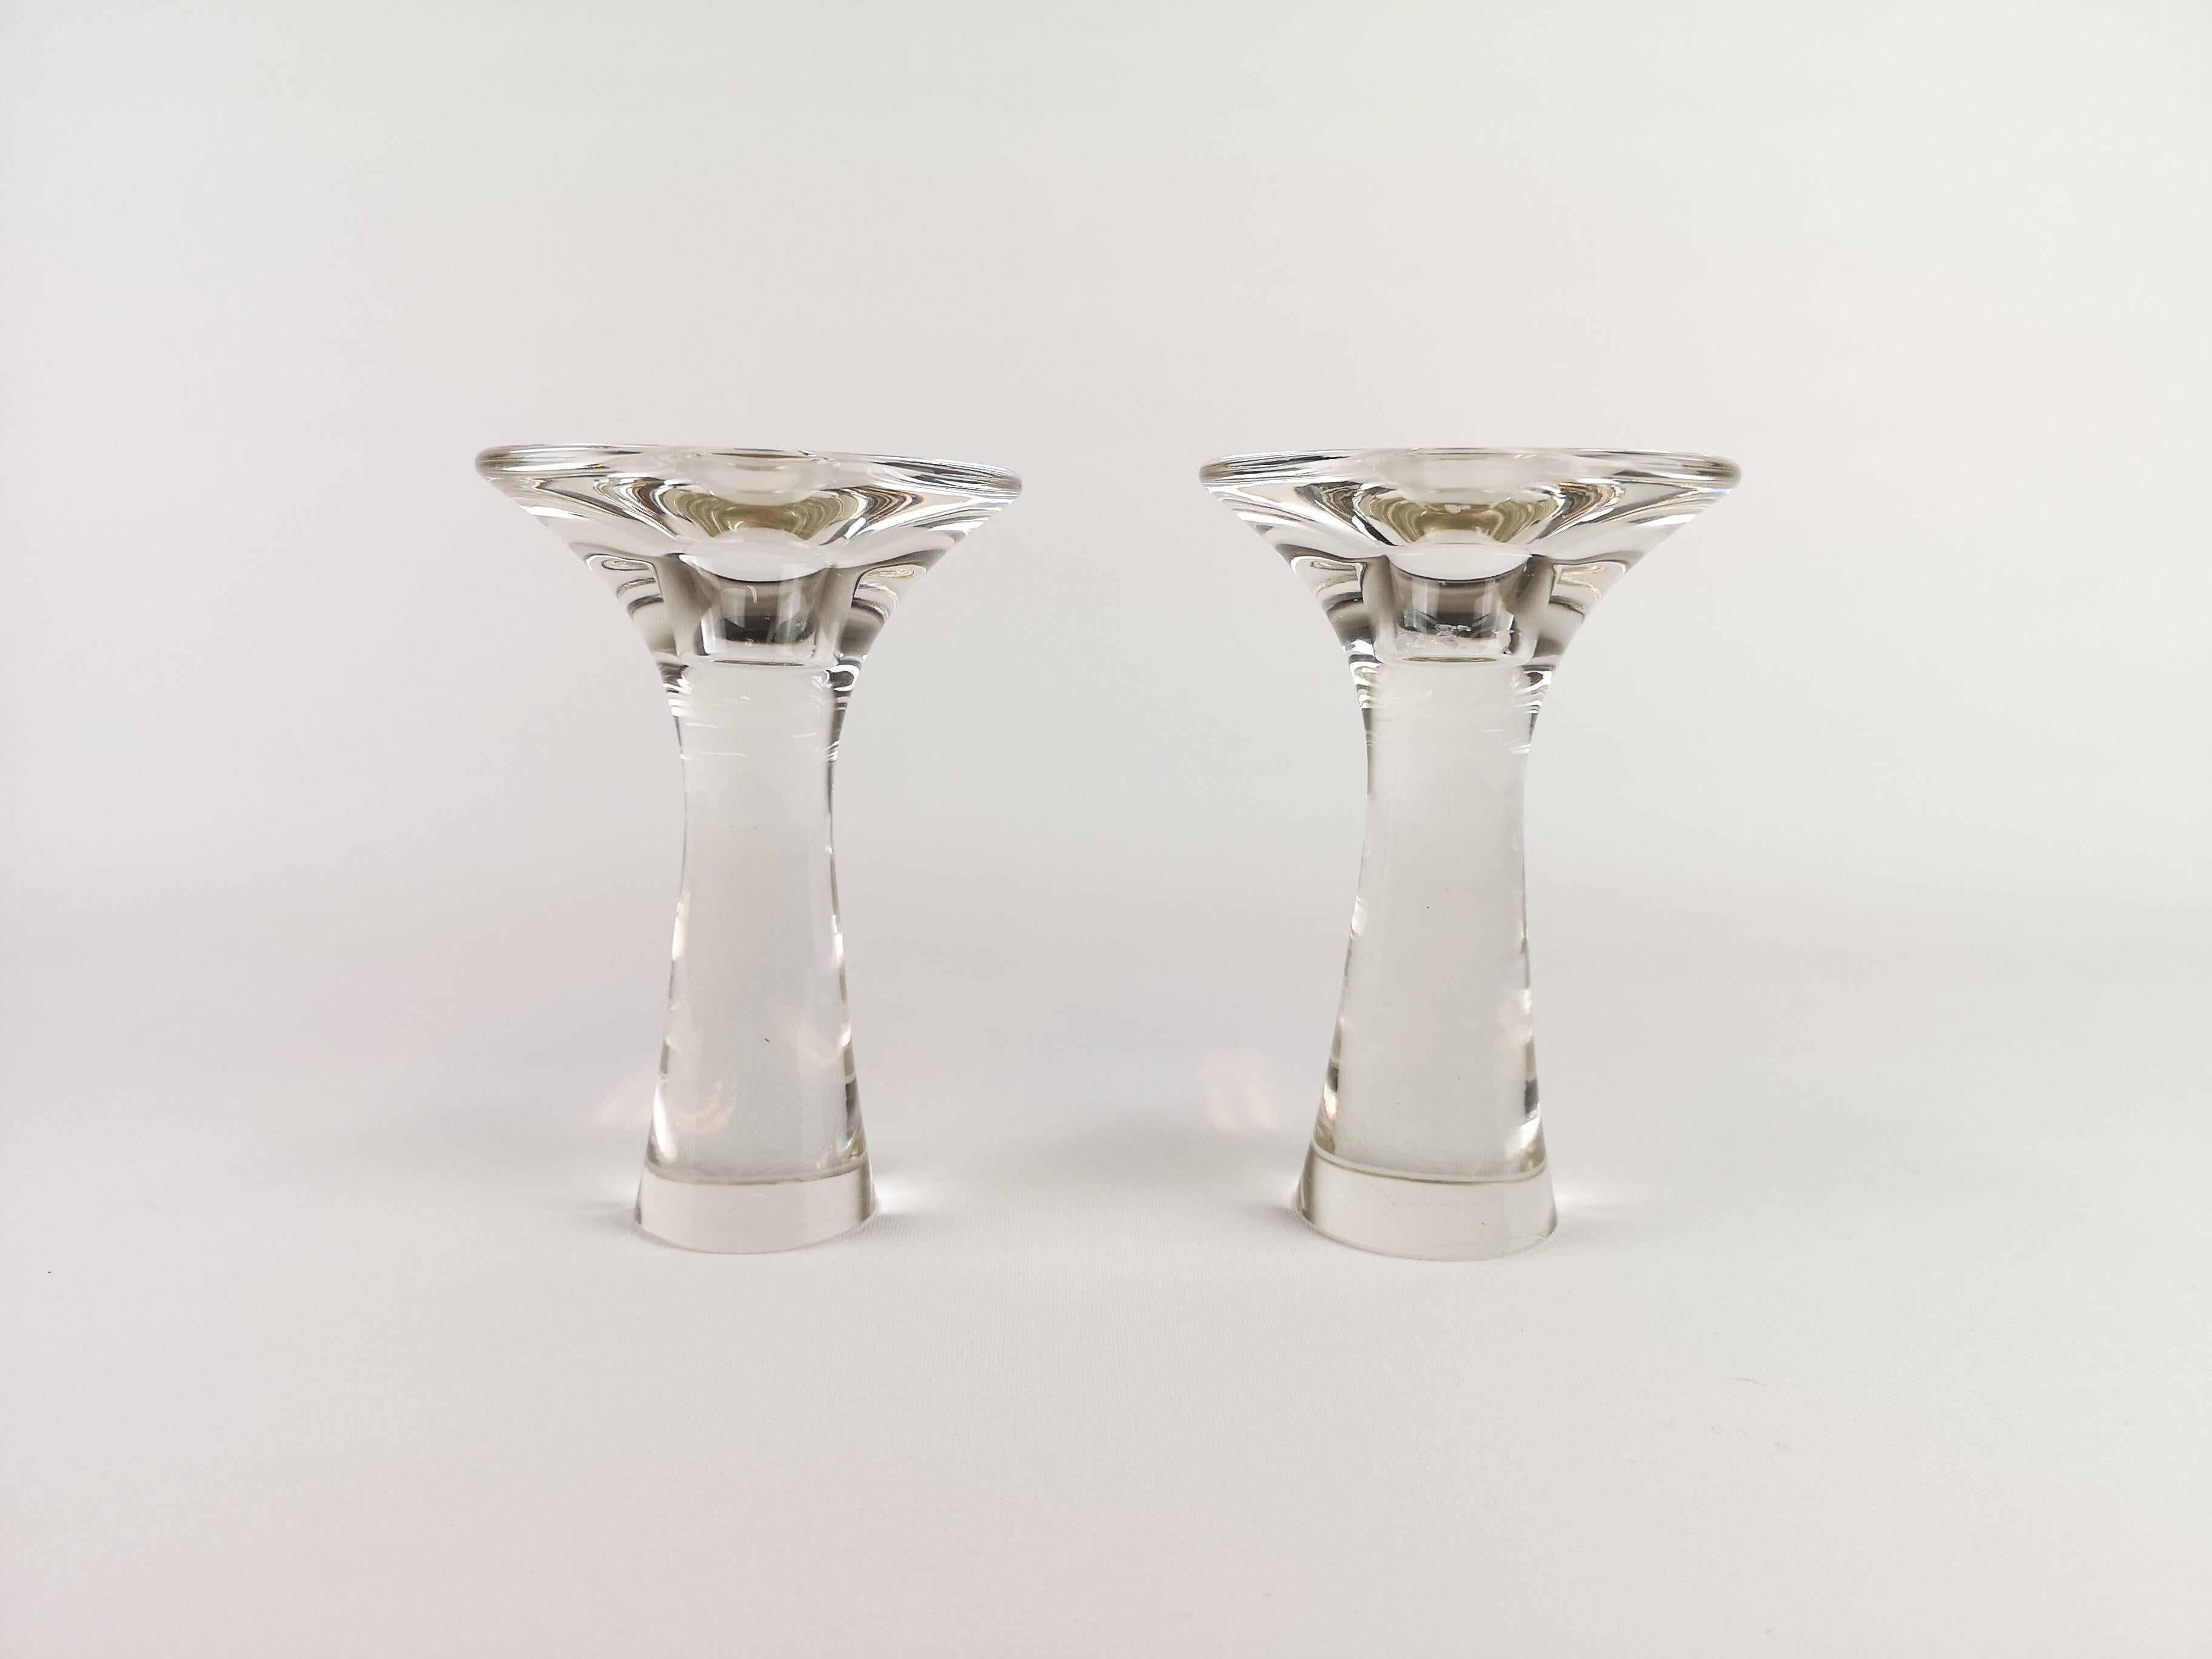 These 2 glass candlesticks are designed by Tapio Wirkkala is called Model 3412.
The object is a classic manufactured by the Finnish workshop Iittala. The pieces is from the 1960s and signed on the bottom 